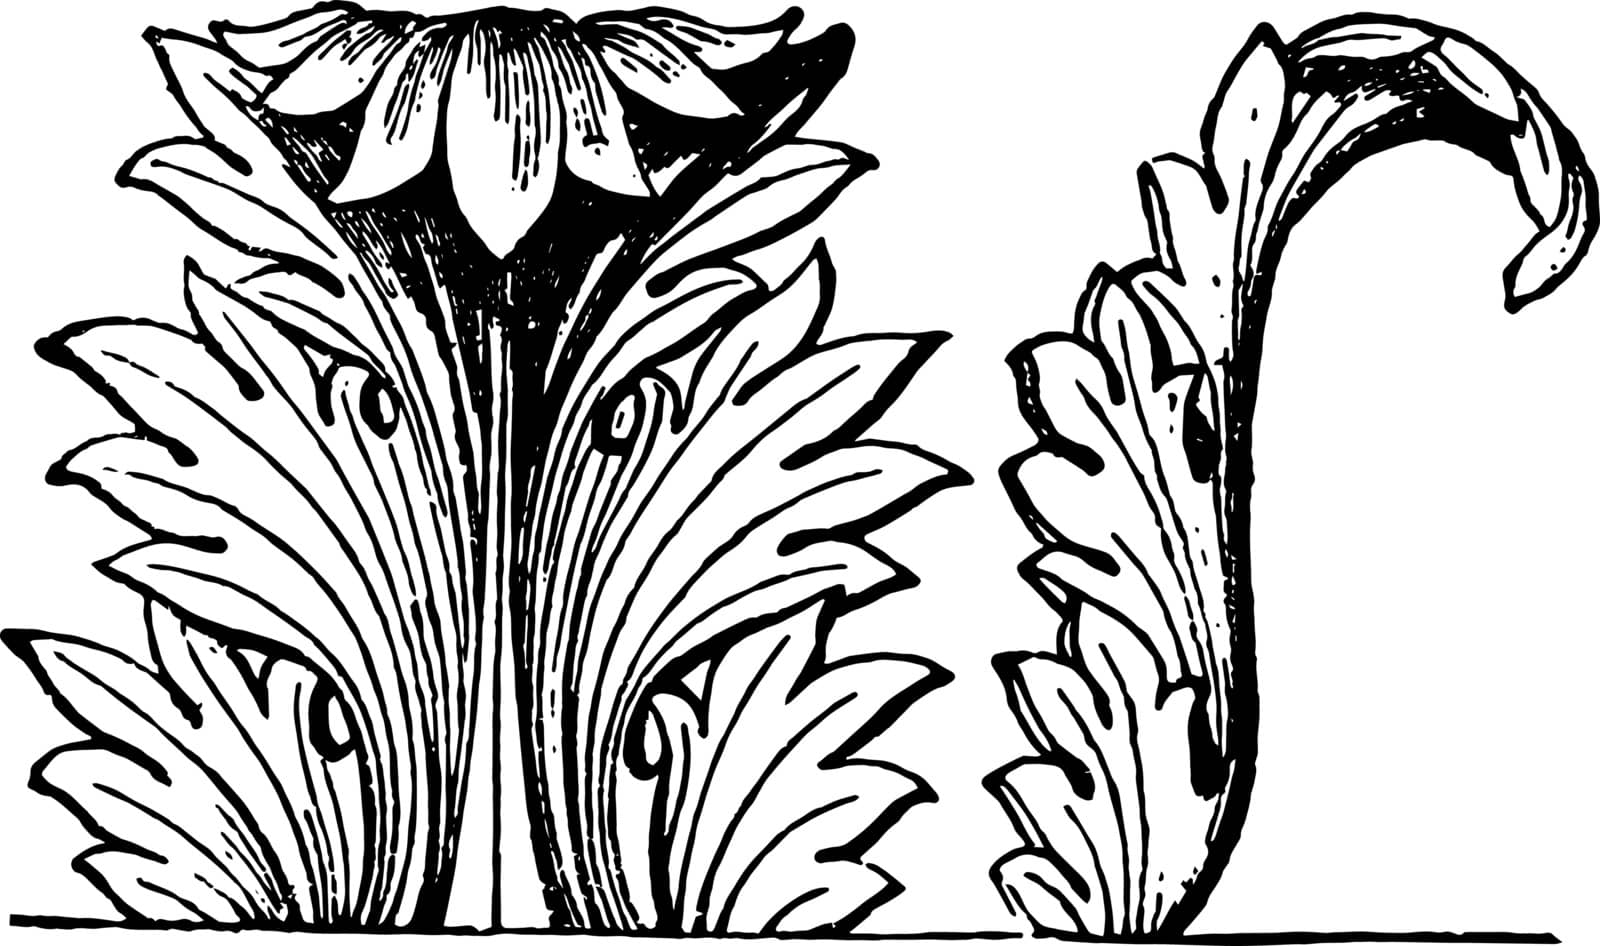 Acanthus Decoration is an acanthus decoration of an architectural column, vintage line drawing or engraving illustration.